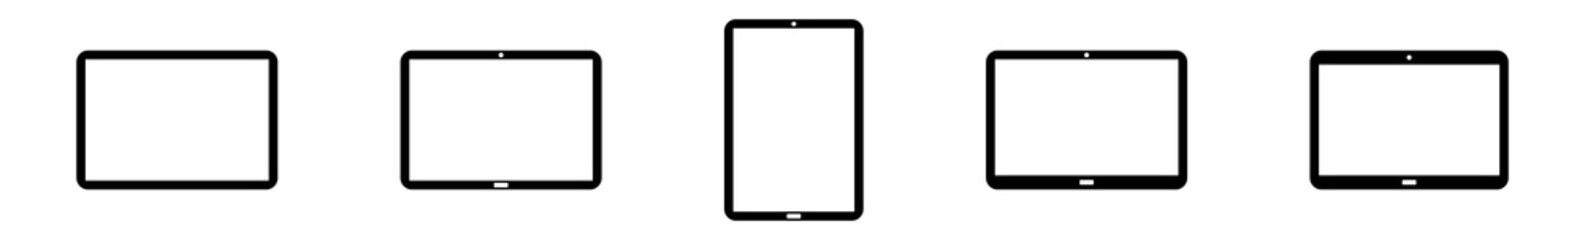 Tablet Computer Icon Black | Tablet PC Illustration | Smartphone Mobile Phone Symbol | Display Logo | Touch Screen Sign | Isolated | Variations